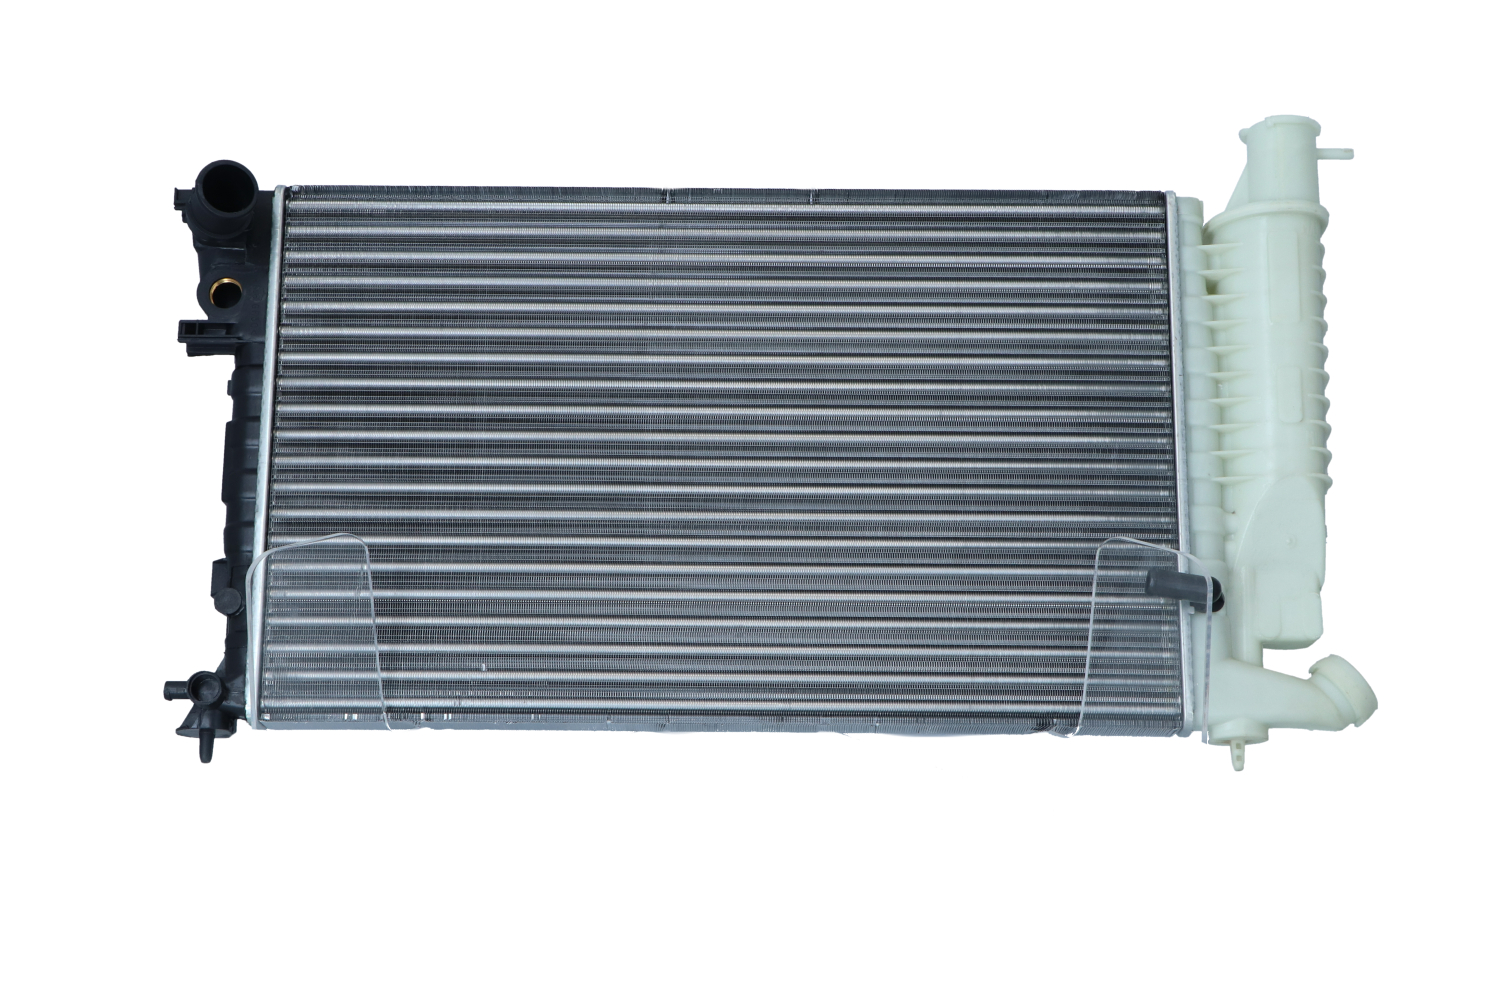 NRF 50475 Engine radiator Aluminium, 610 x 378 x 34 mm, Mechanically jointed cooling fins